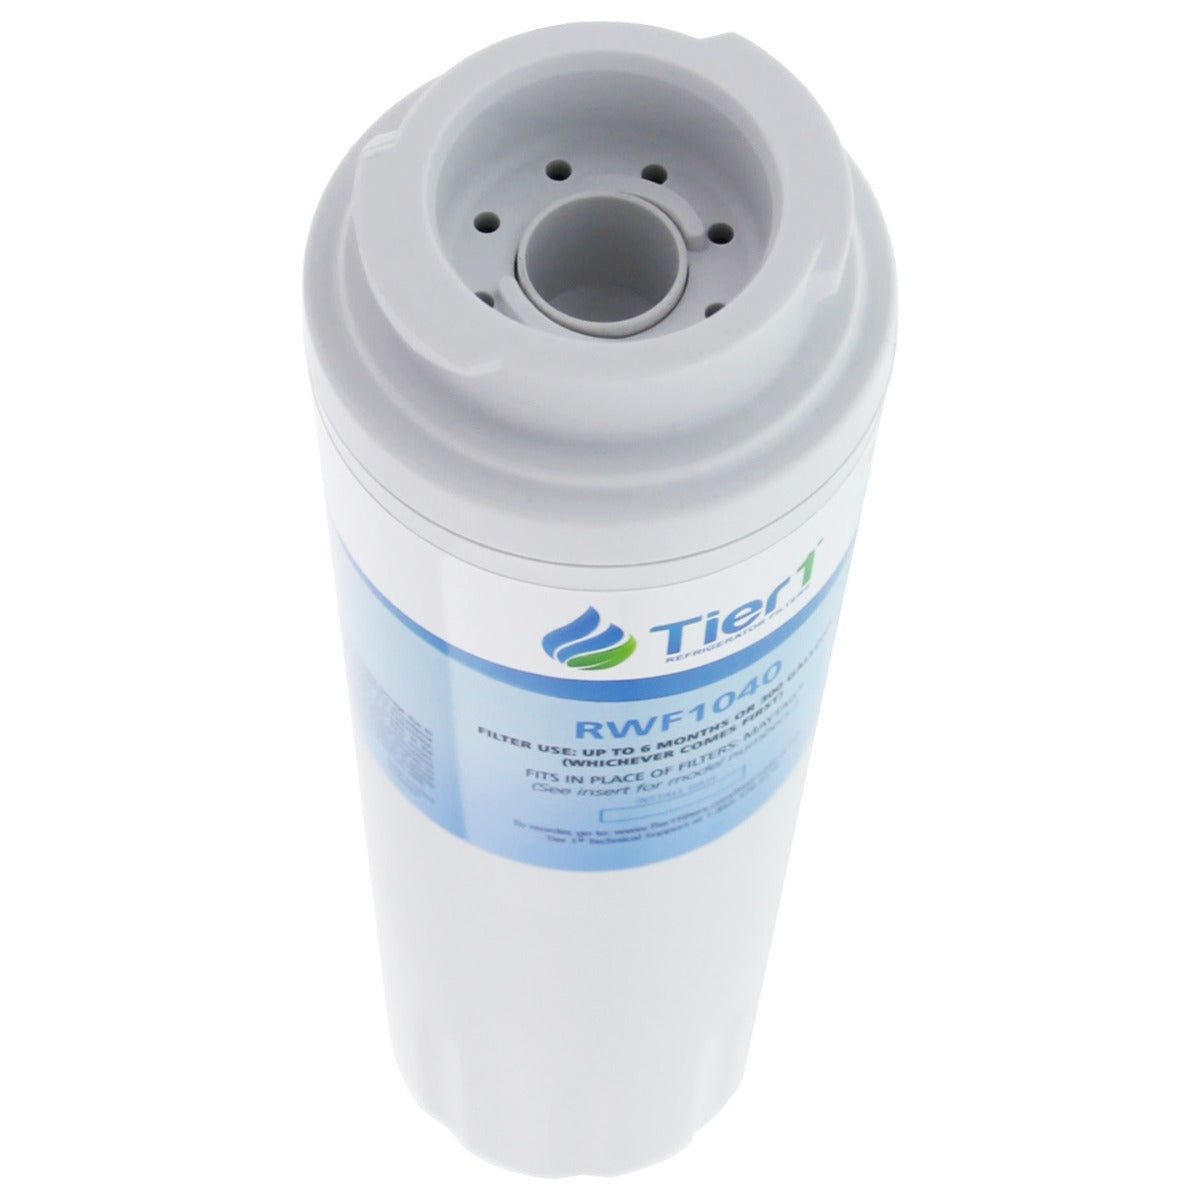 Tier1 EveryDrop EDR4RXD1 Maytag UKF8001 Refrigerator Water Filter Replacement Comparable